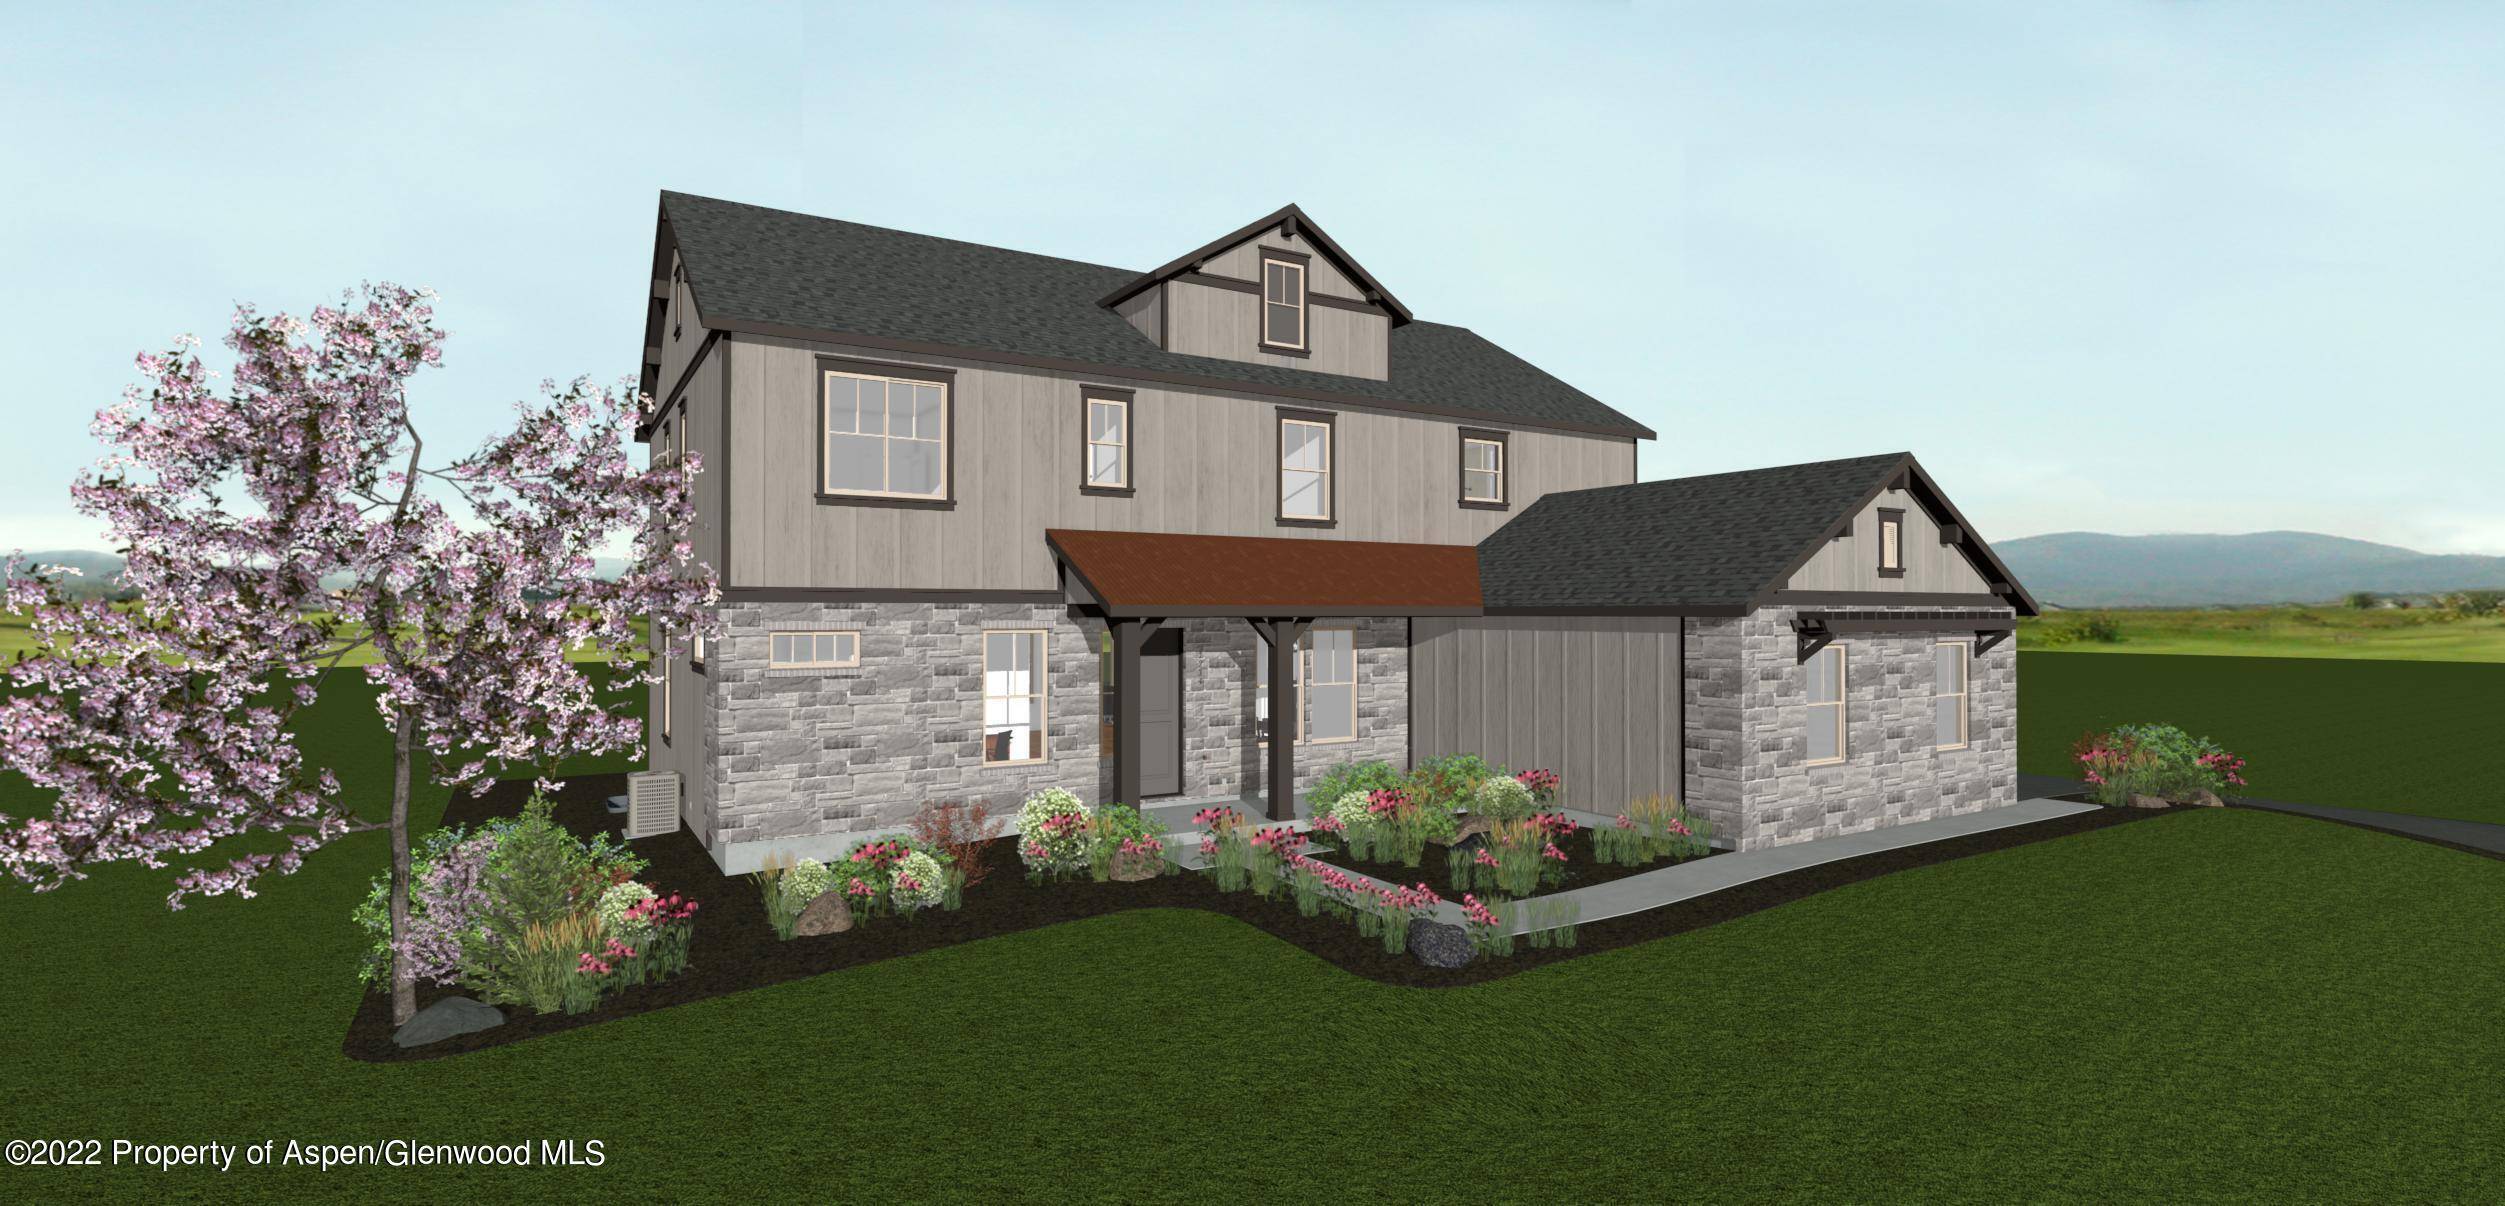 New Construction on a one acre river lot in Glenwood !